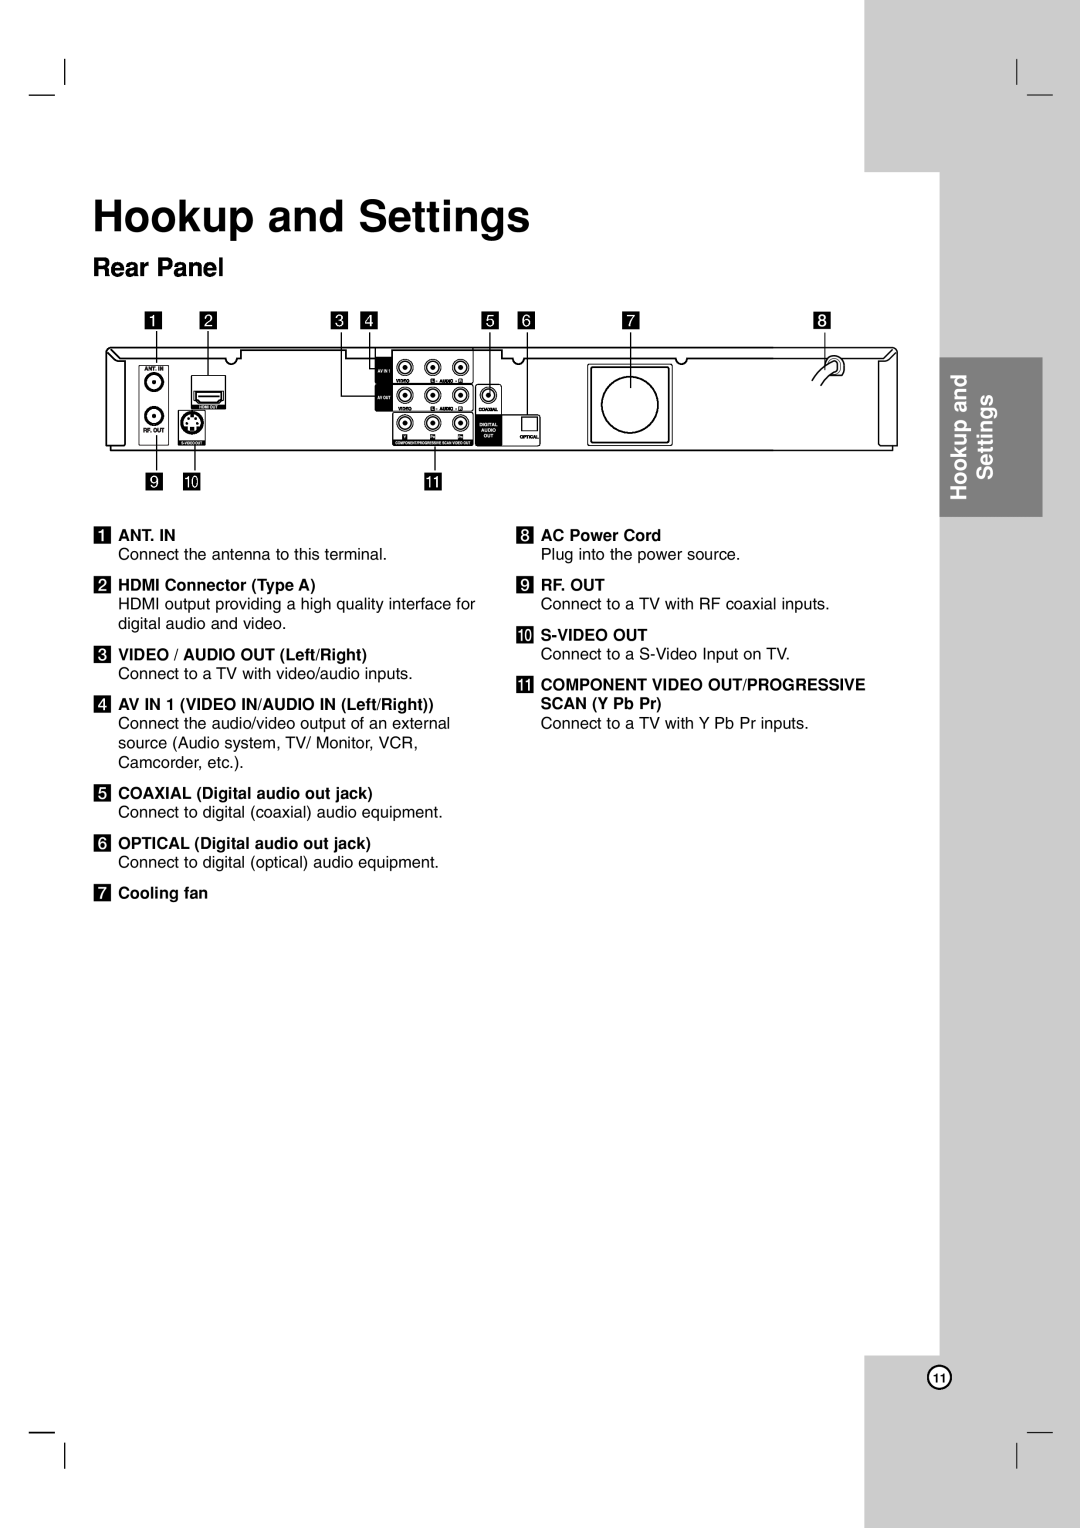 LG Electronics DR1F9H Hookup and Settings, Rear Panel, i jk, a ANT. IN, b HDMI Connector Type A, g Cooling fan, i RF. OUT 